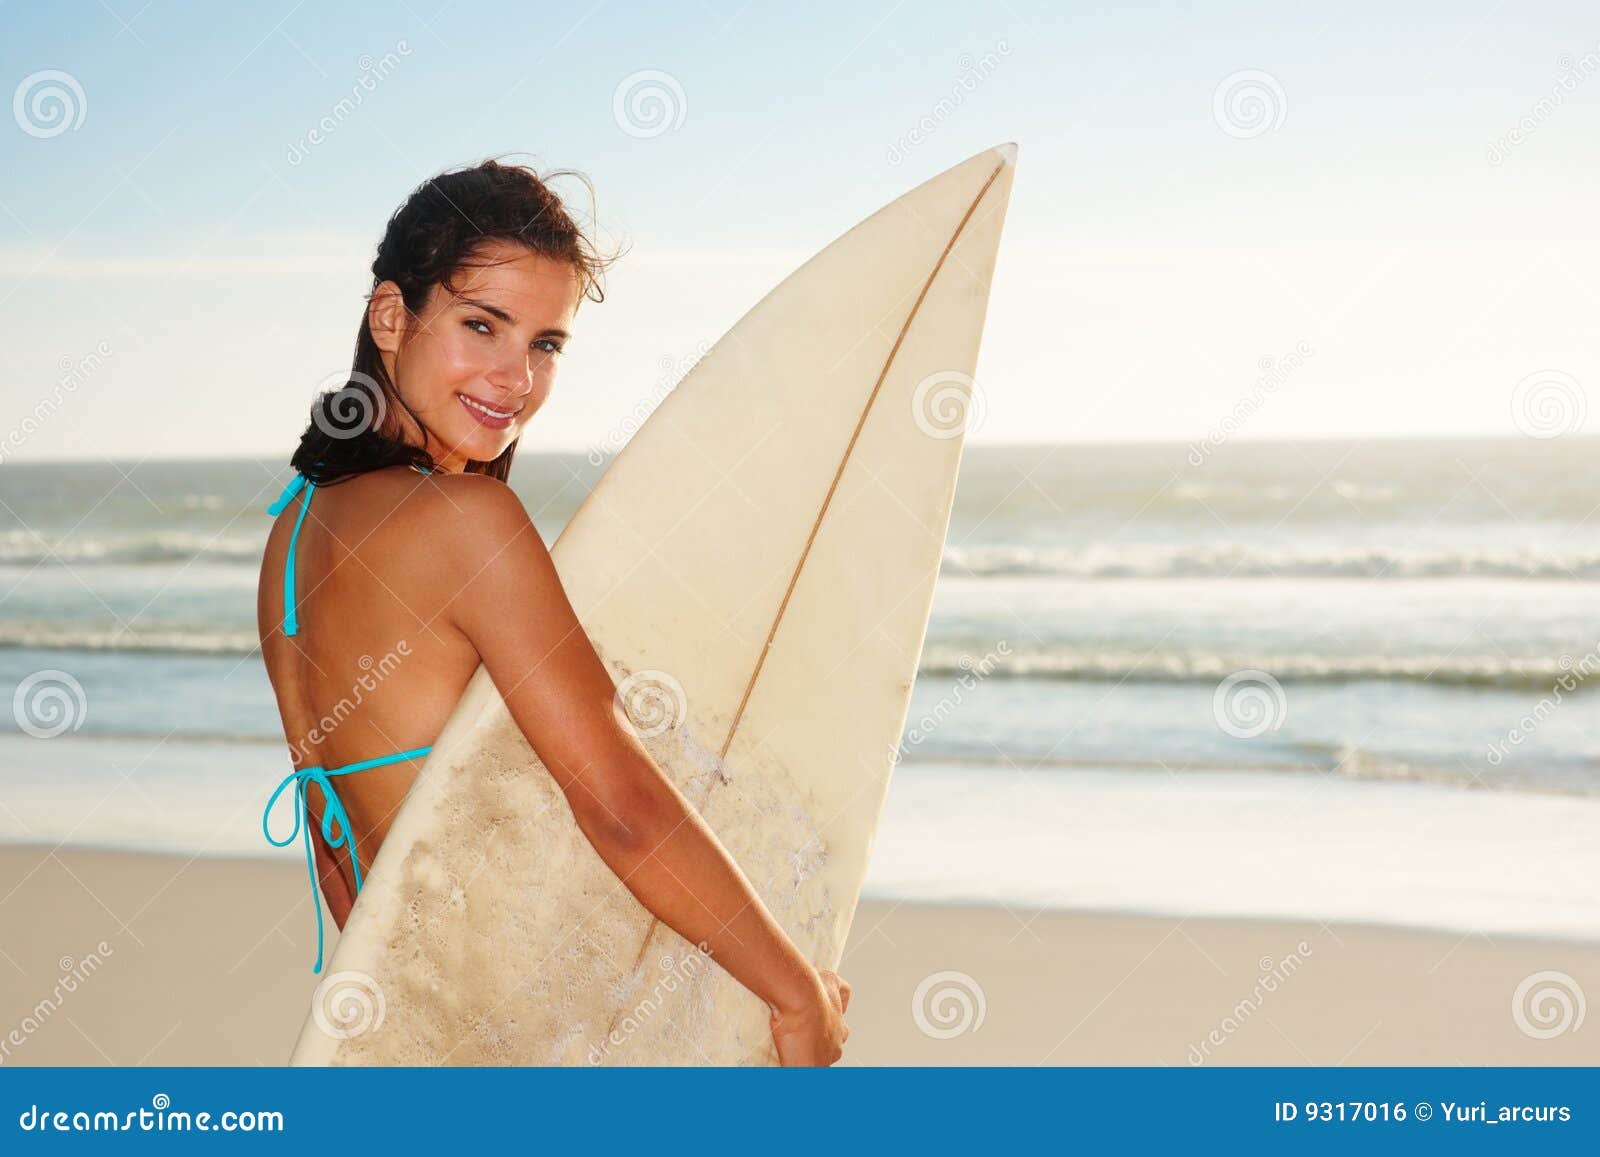 Happy Female Holding A Surf Board At The Sea Shore Stock